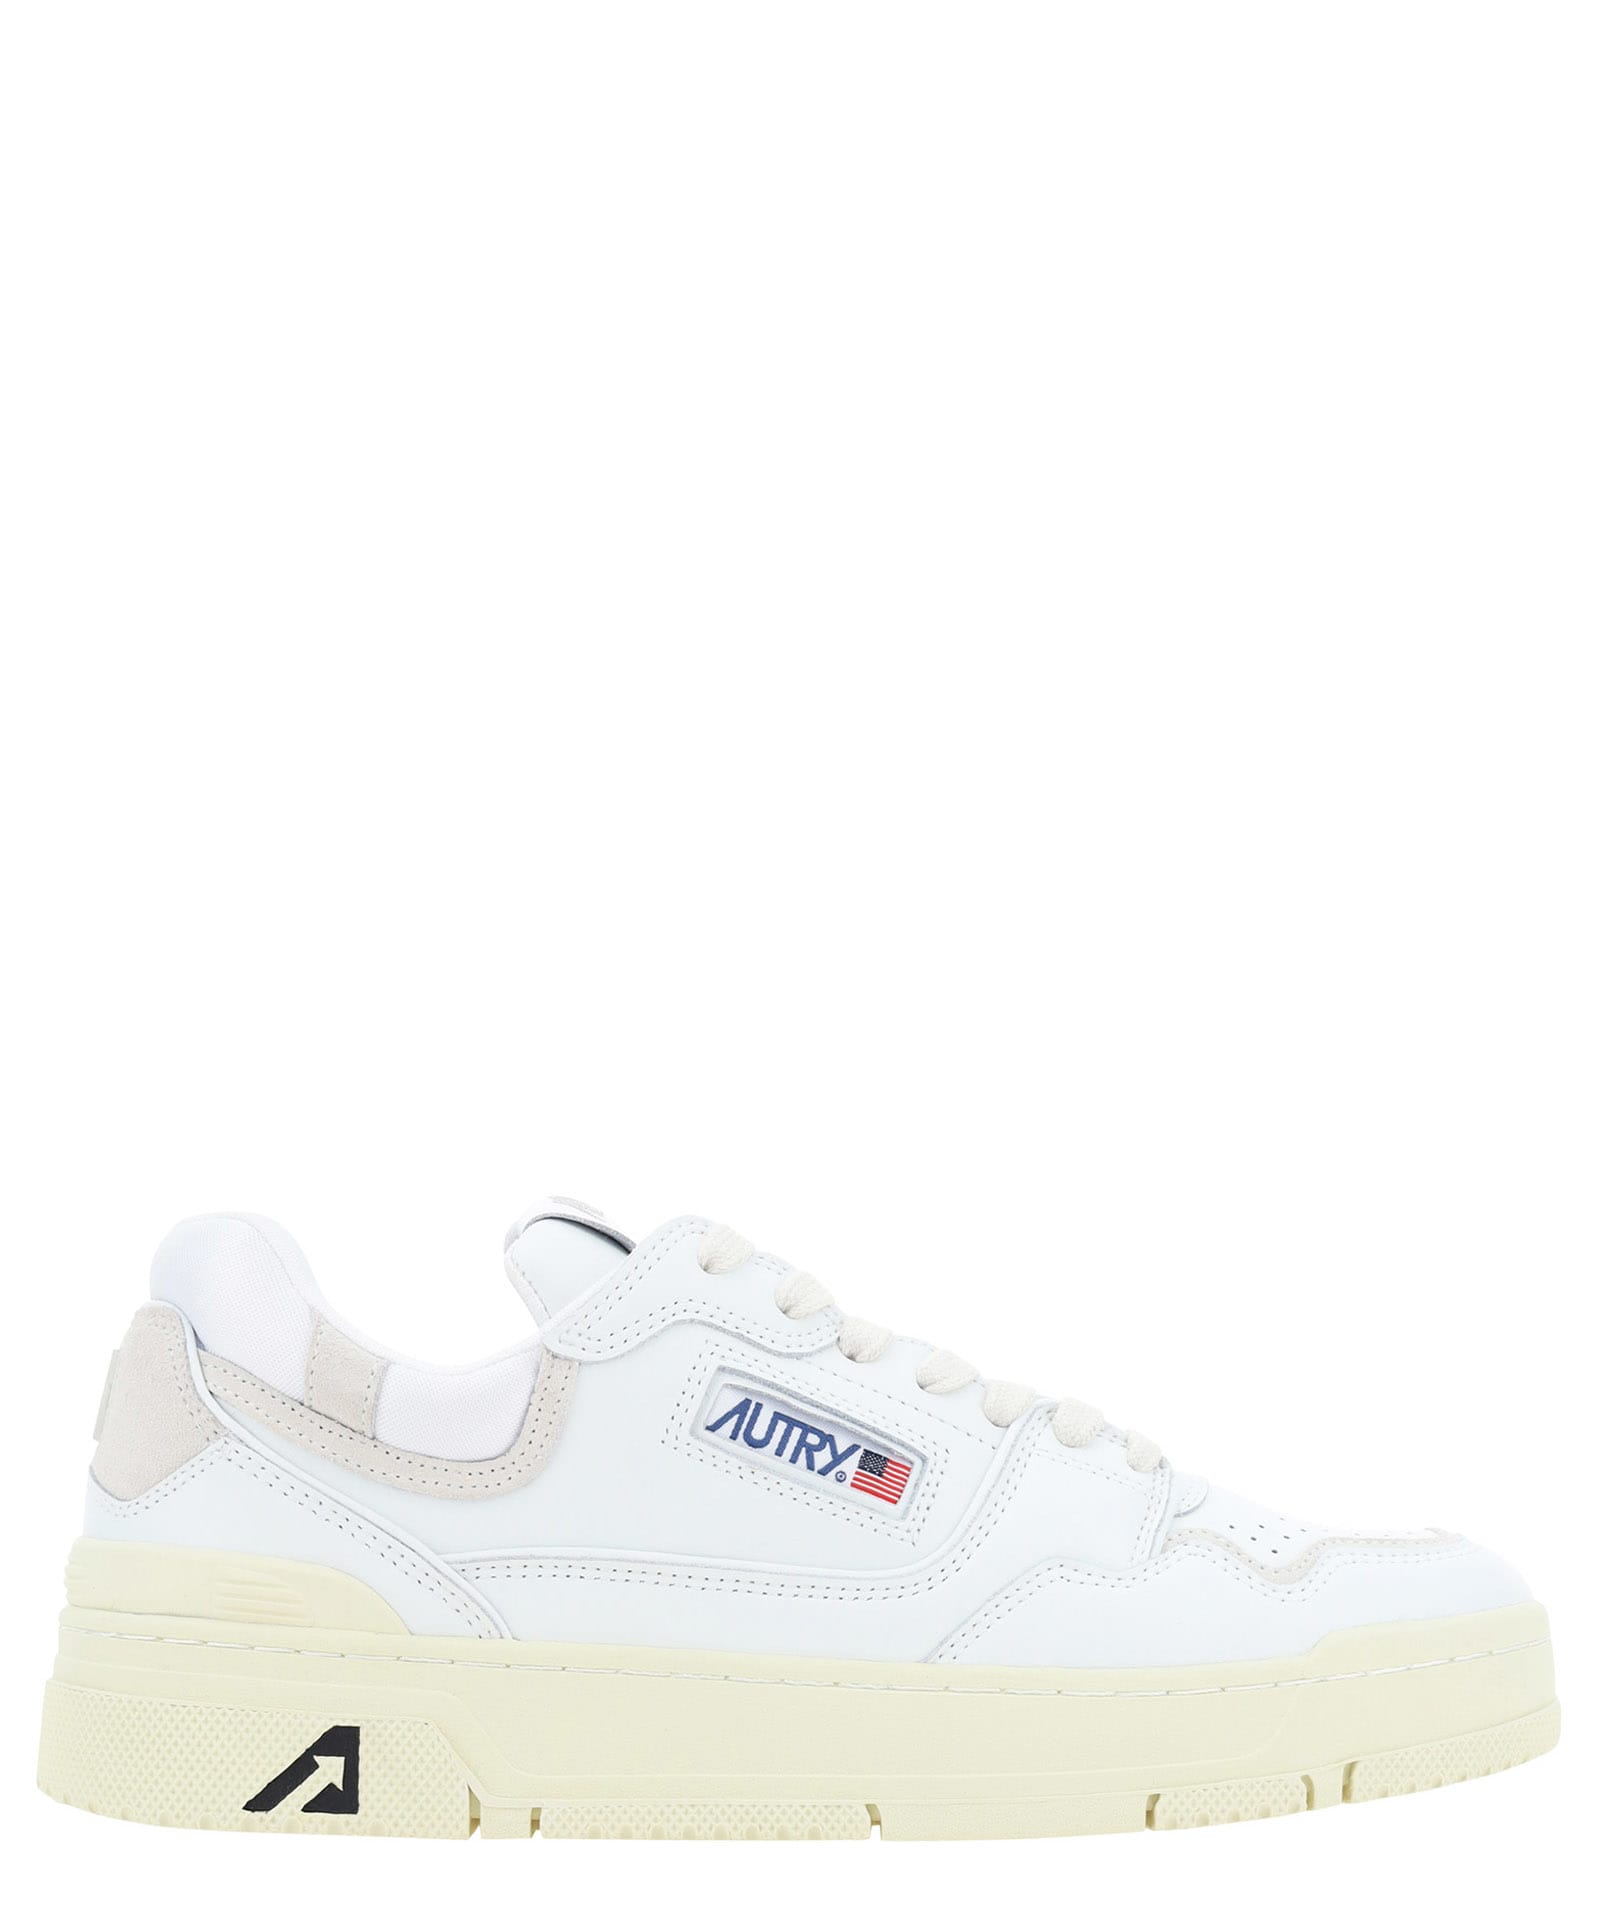 Shop Autry Clc Low Leather Sneakers In Mult/mat Wht